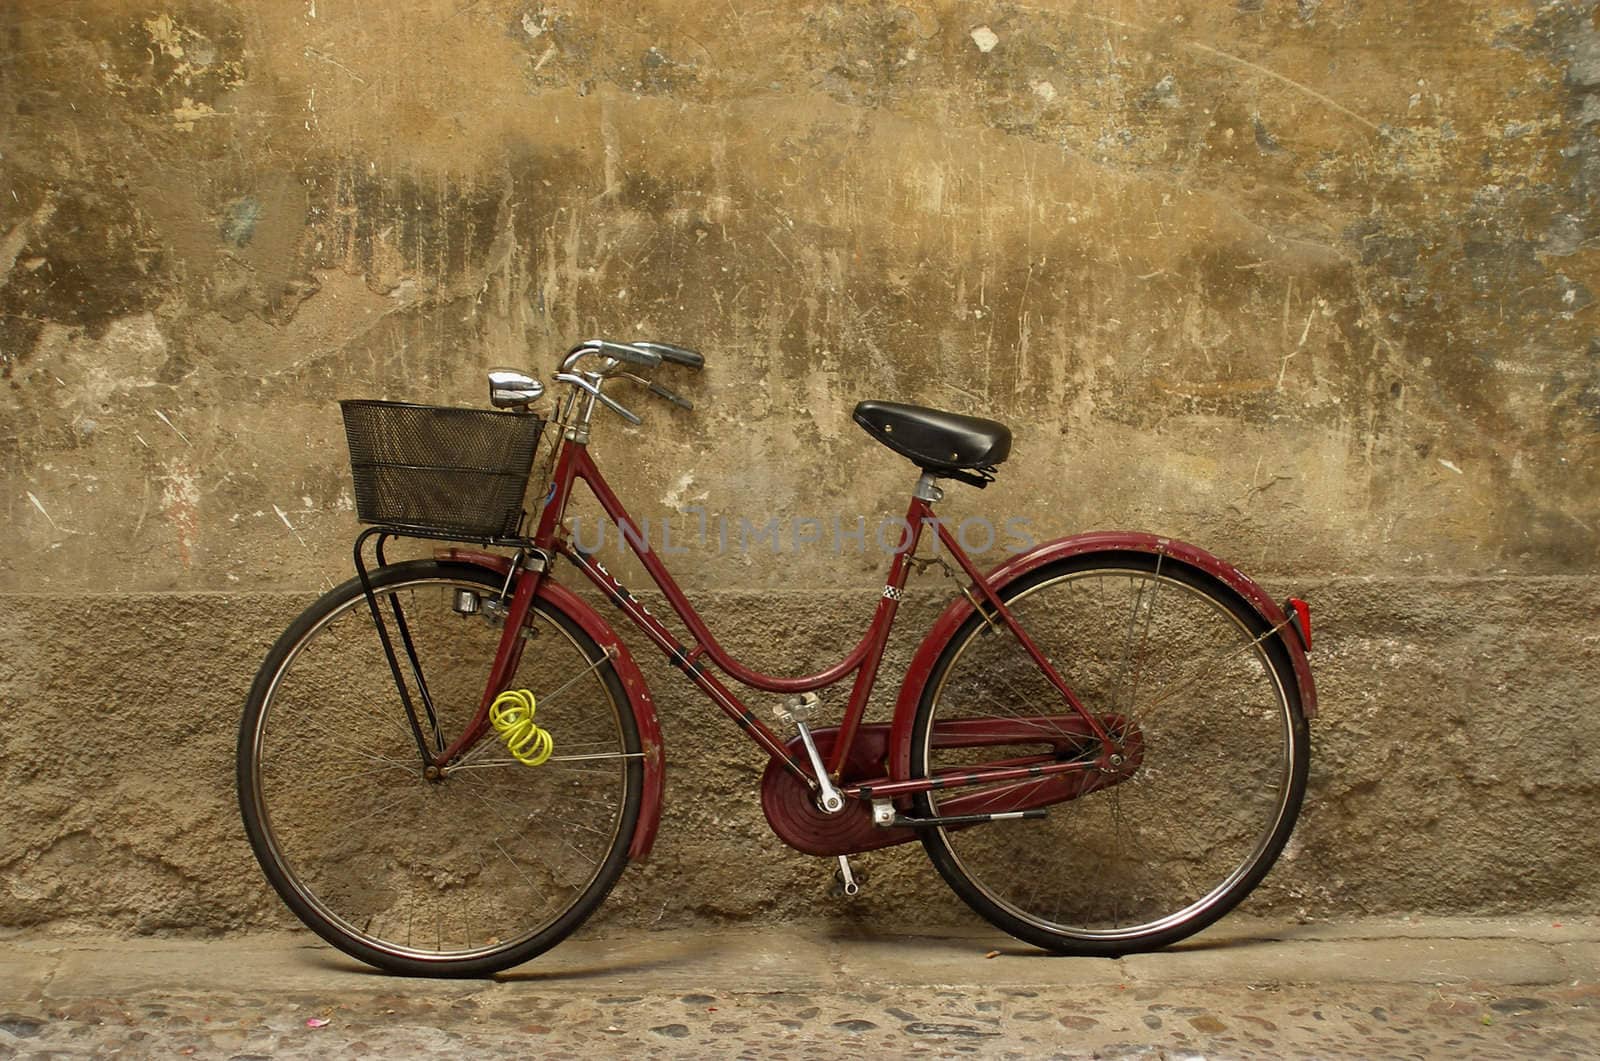 Italian bicycle by Vectorex